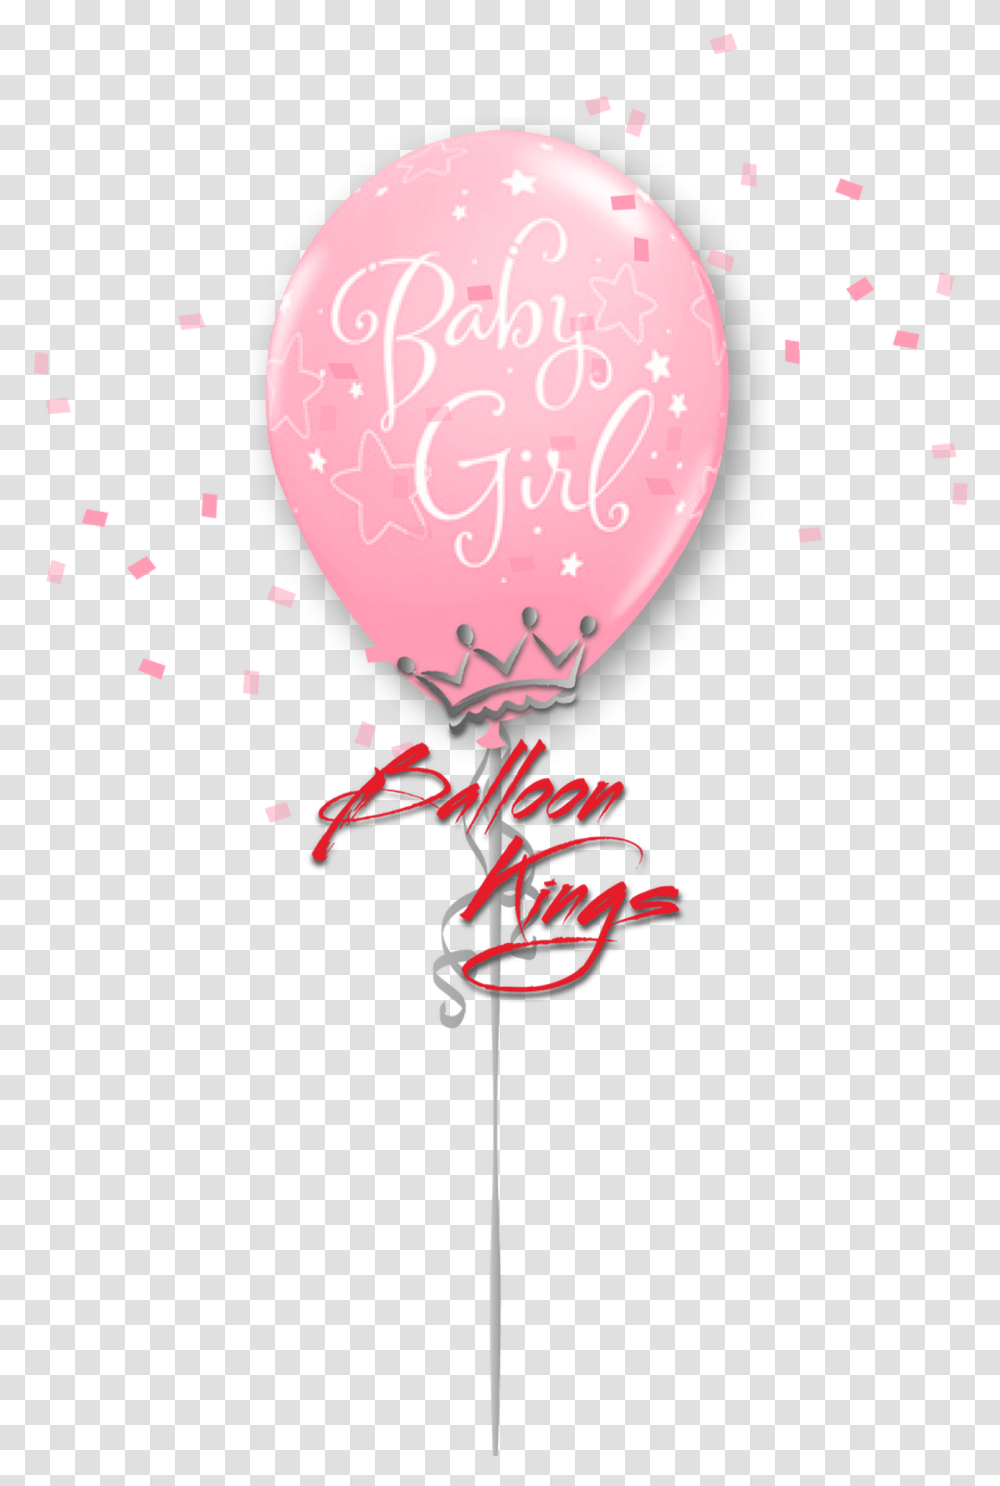 Latex Baby Girl Stars Pink Portable Network Graphics, Balloon, Paper, Glass, Heart Transparent Png